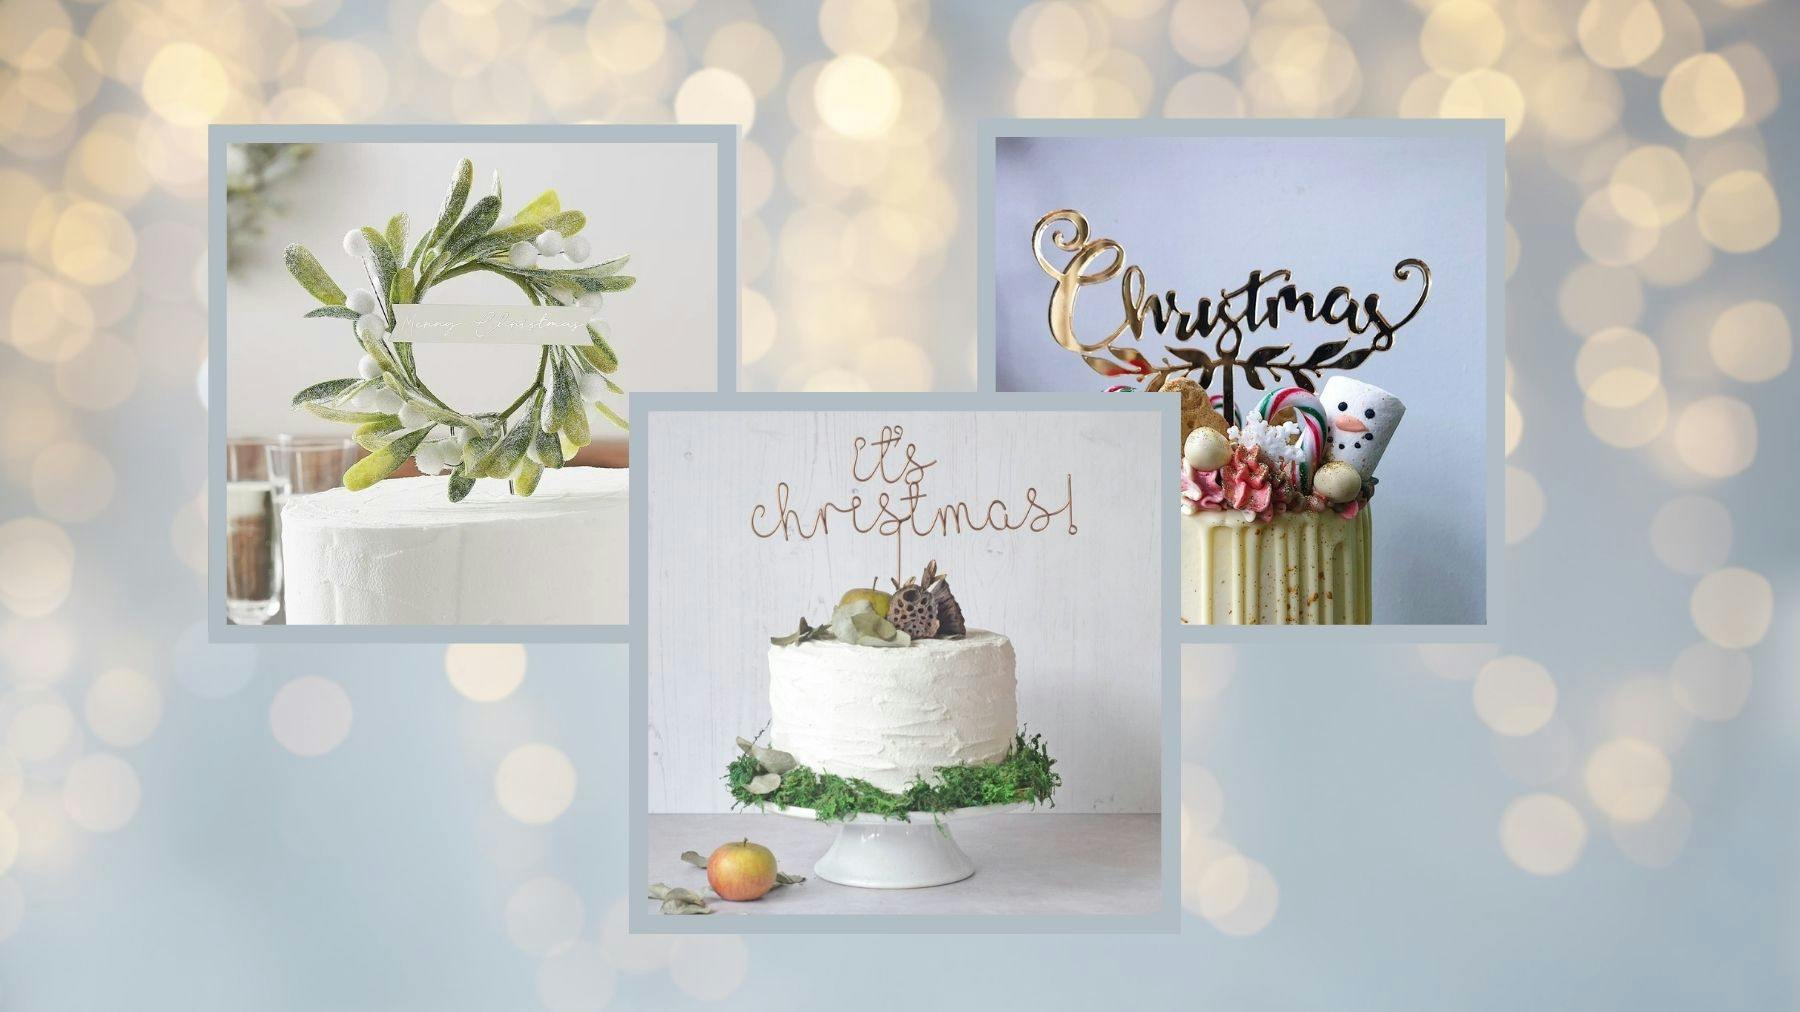 Merry Christmas Cake Topper | Icing Sheet / Wafer Paper | Edible Print |  eBay